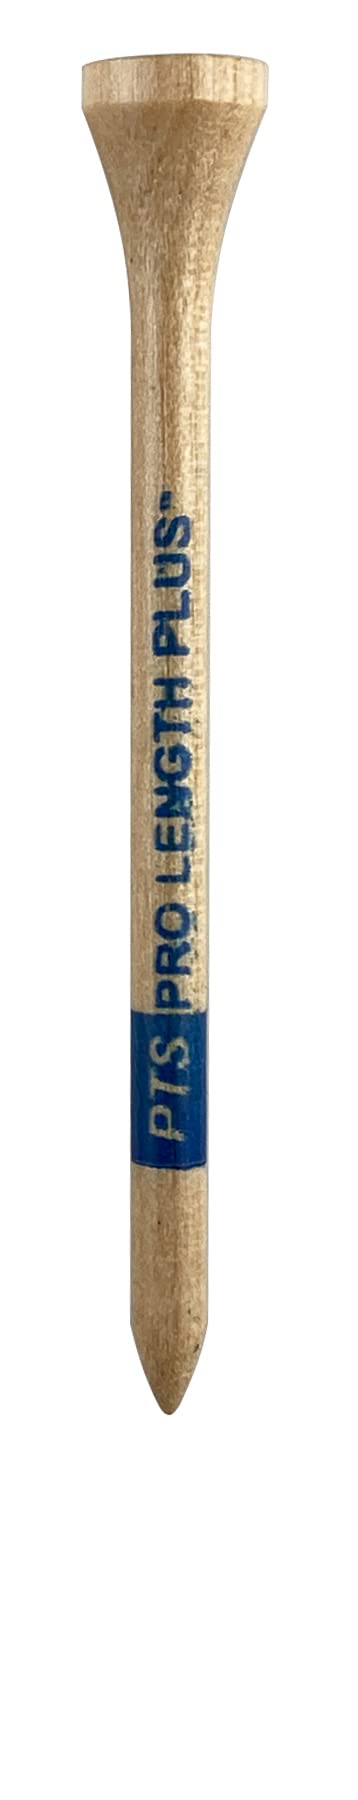 Pride Professional Tee System ProLength Plus Tee, 3-1/4-Inch, 75 Count Bag (Blue on Natural)